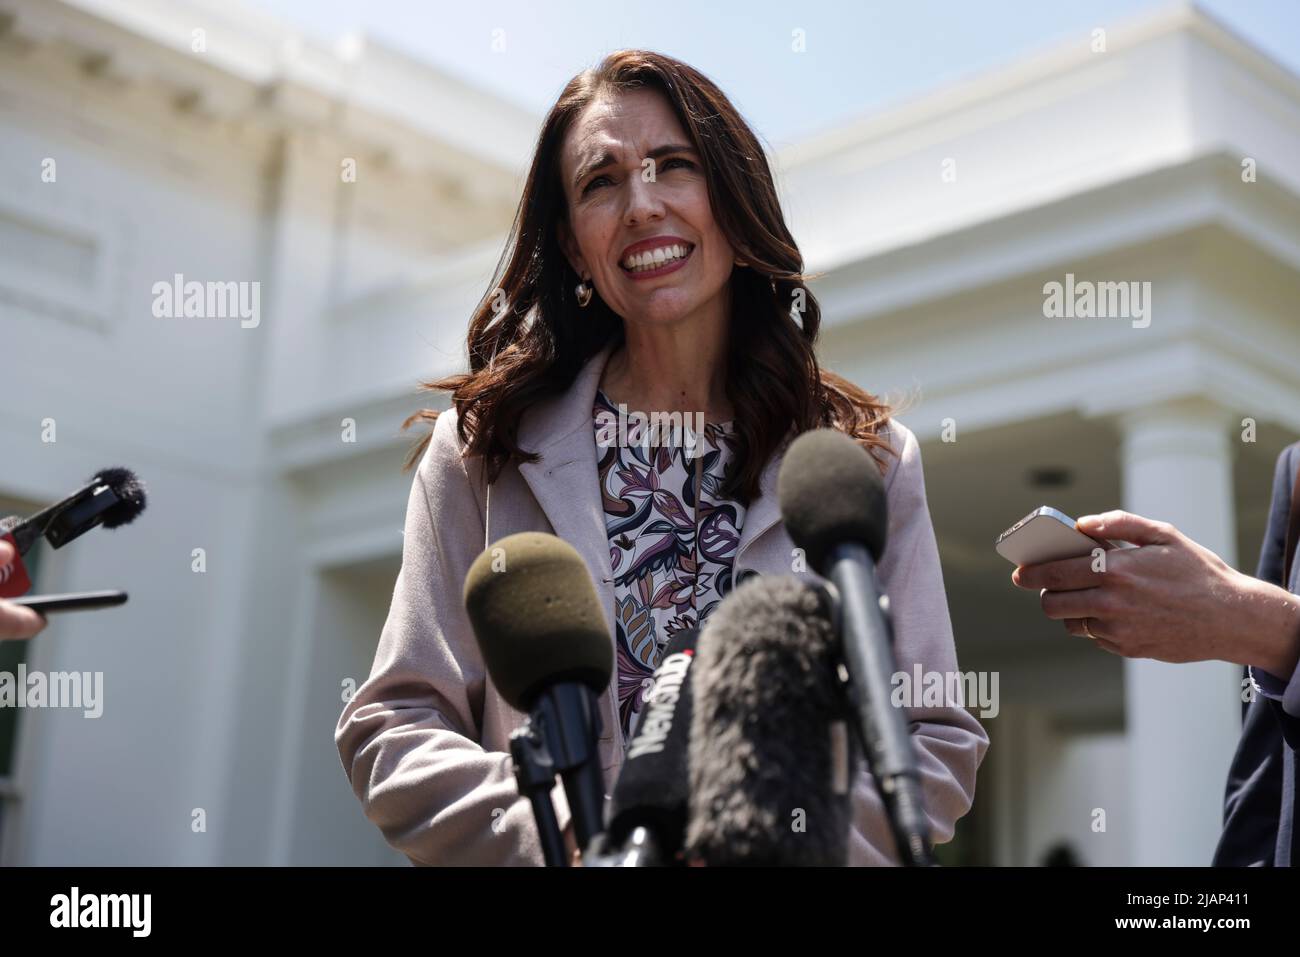 Washington, US, May 31, 2022, Prime Minister Jacinda Ardern of New Zealand talks to reporters outside the West Wing of the White House in Washington, DC following her meeting with United States President Joe Biden in the Oval Office on May 31, 2022.Credit: Oliver Contreras/Pool via CNP /MediaPunch Stock Photo